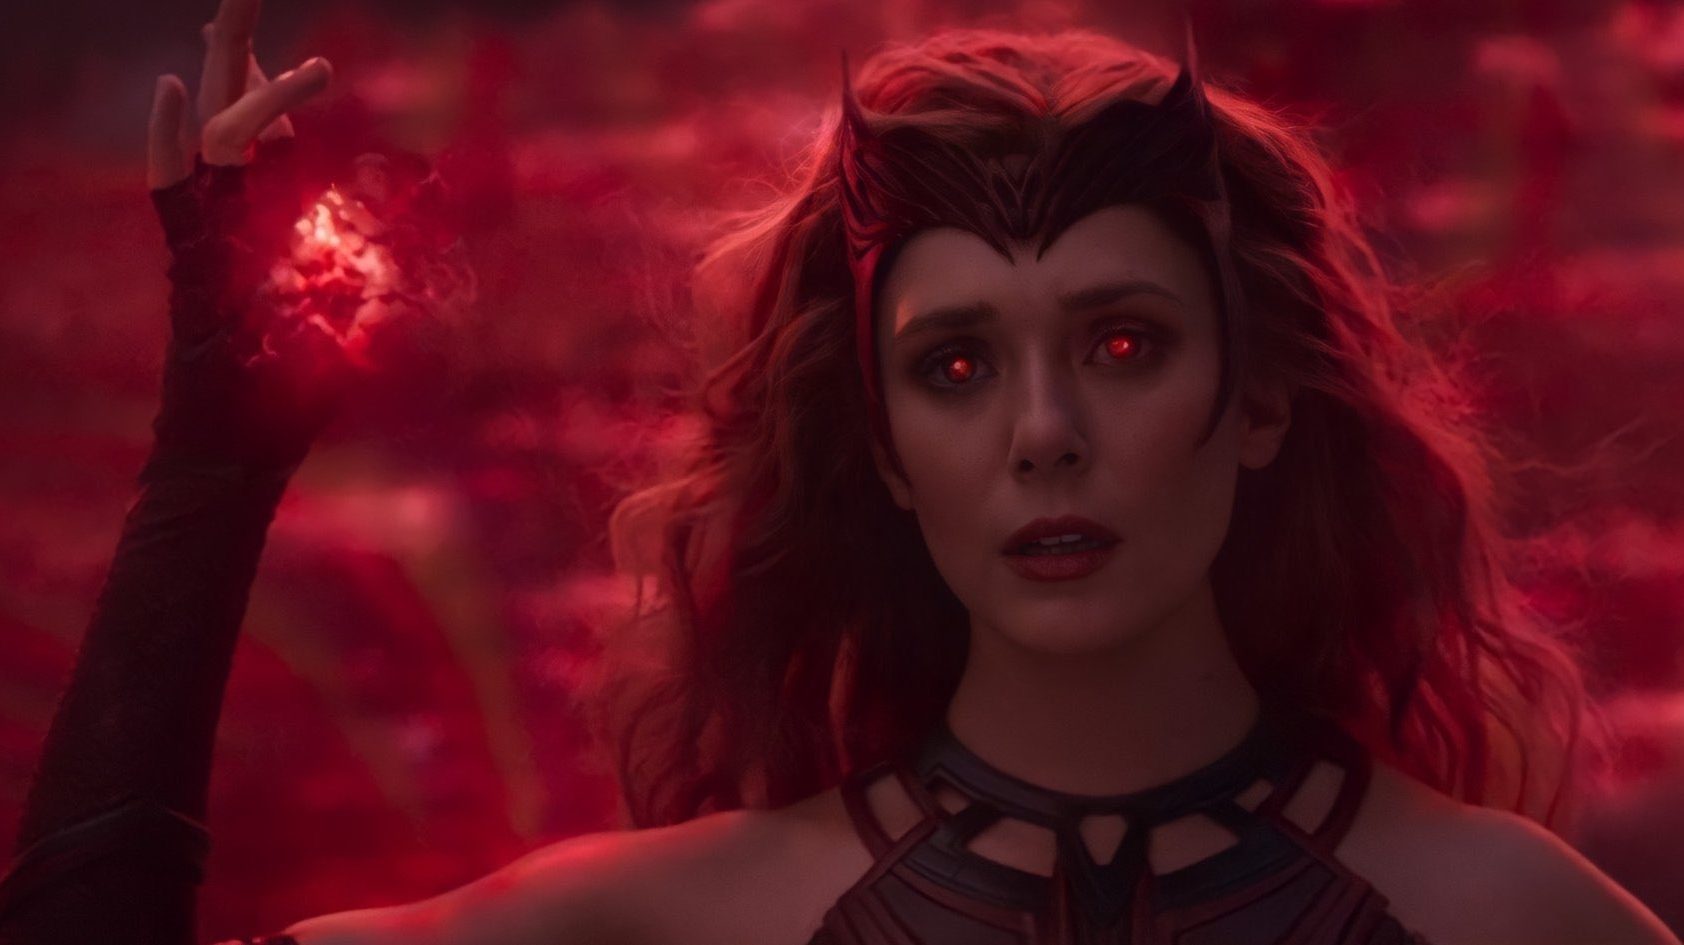 Wanda Maximoff glows with red power and finally becomes the Scarlet Witch as seen in the series finale of WandaVision.